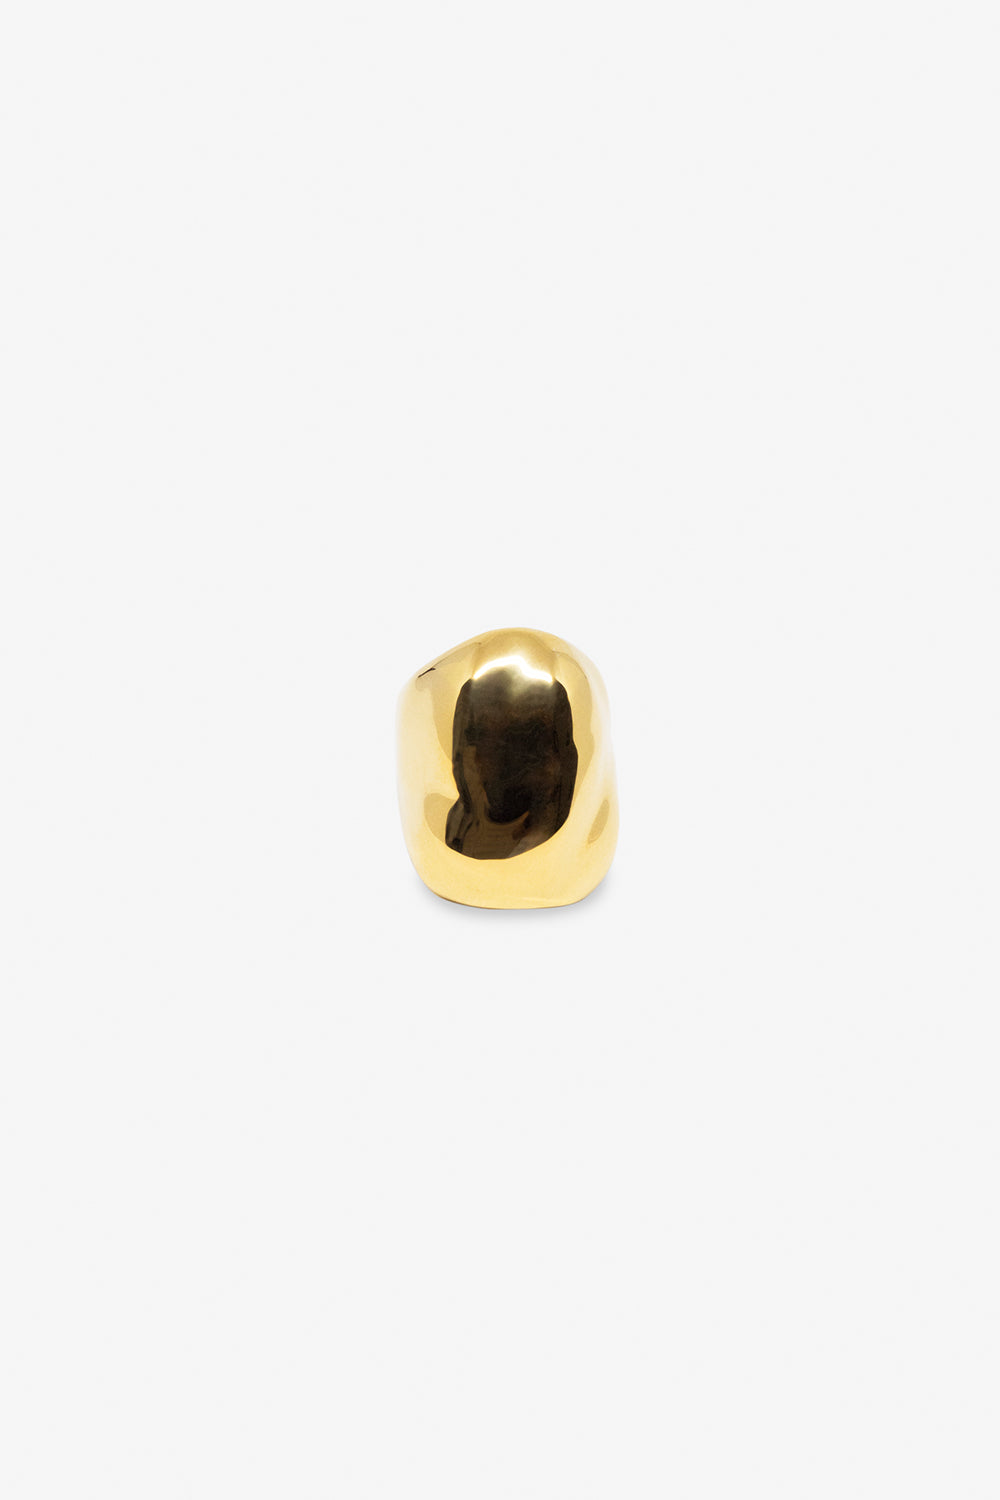 Flash Jewellery Dylan Dome Ring in 14k Gold Vermeil